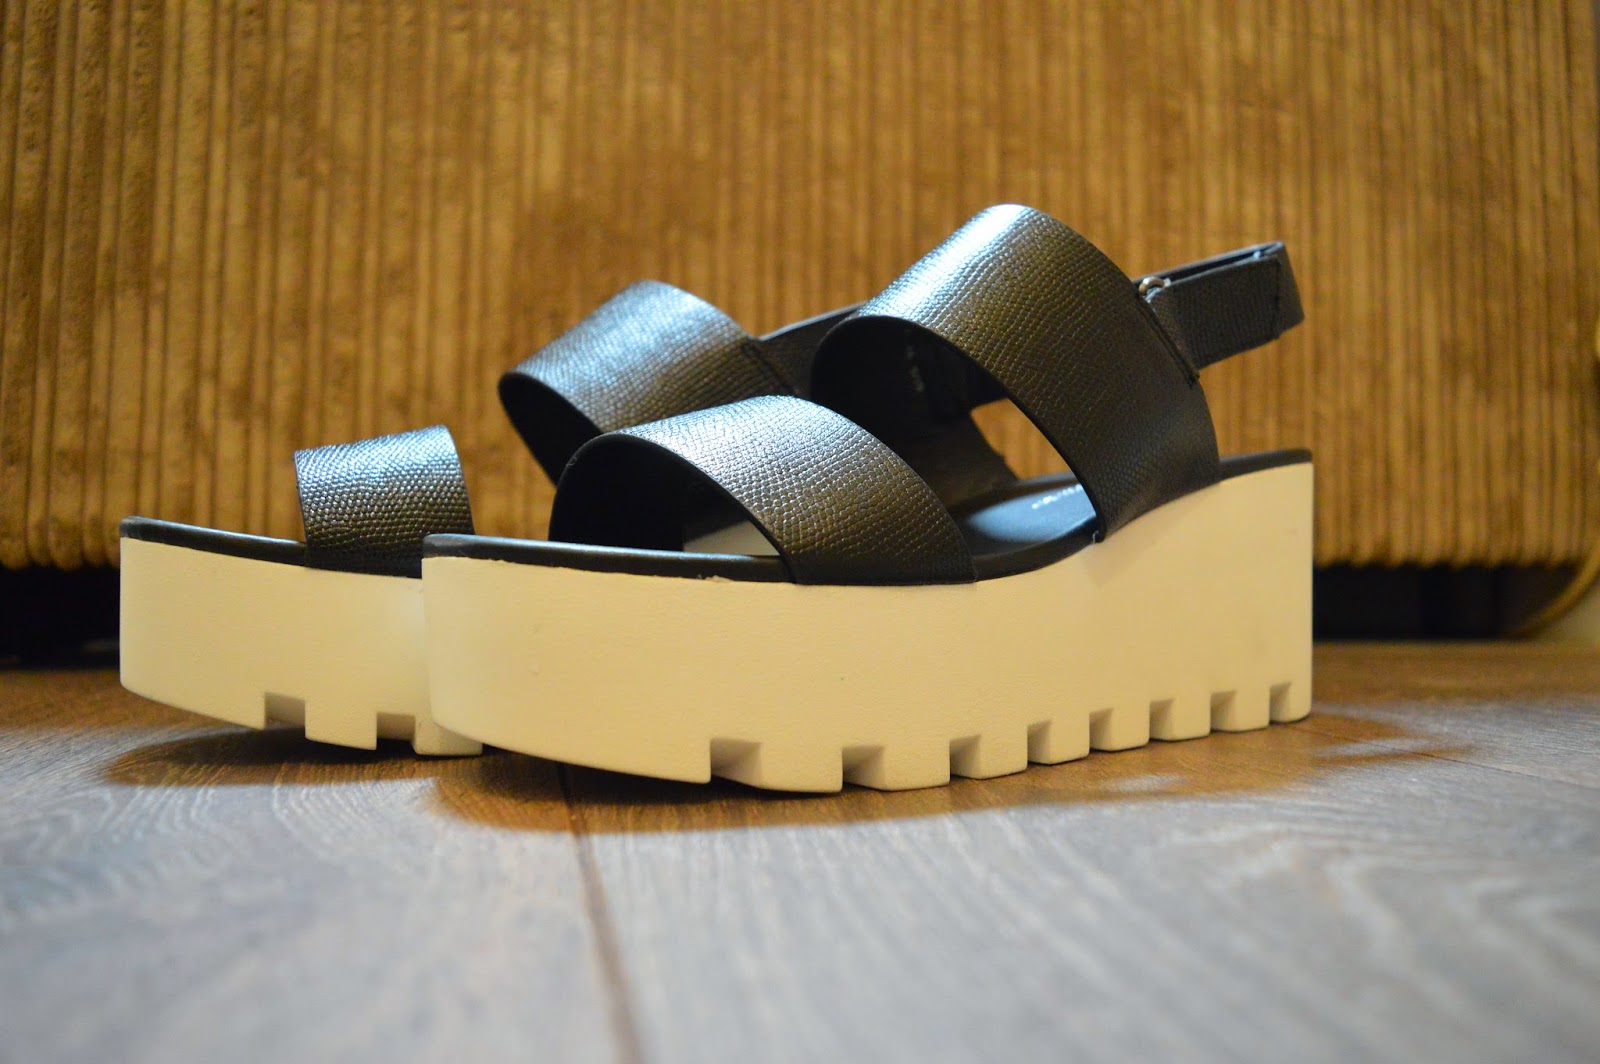 The Life of LeeshaStarr: Perfection from Primark: Platform Sandals